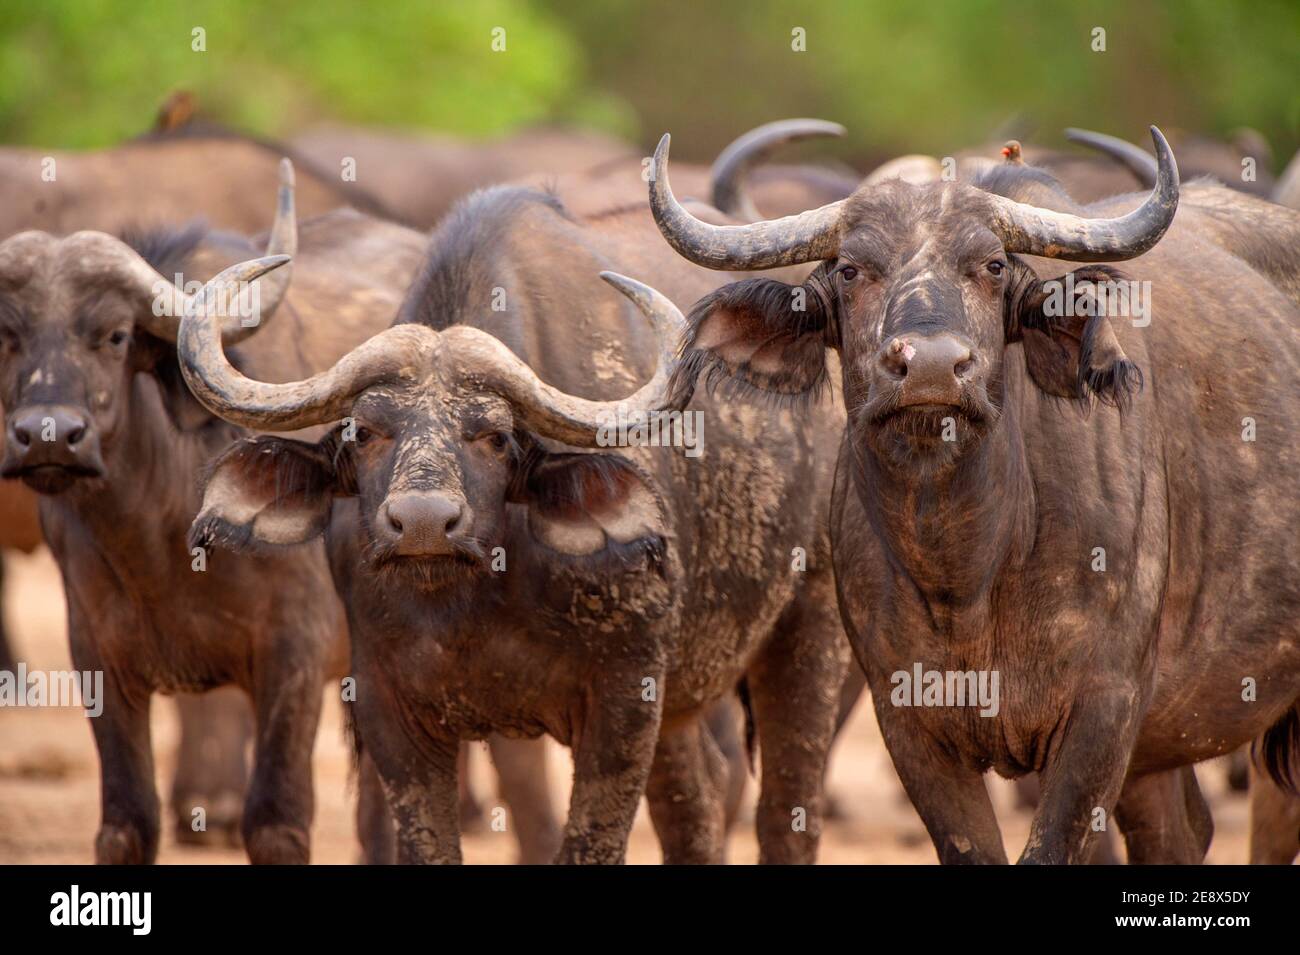 A large herd of Cape Buffalo Syncerus caffer in Zimbabwe's Mana Pools National Park. Stock Photo